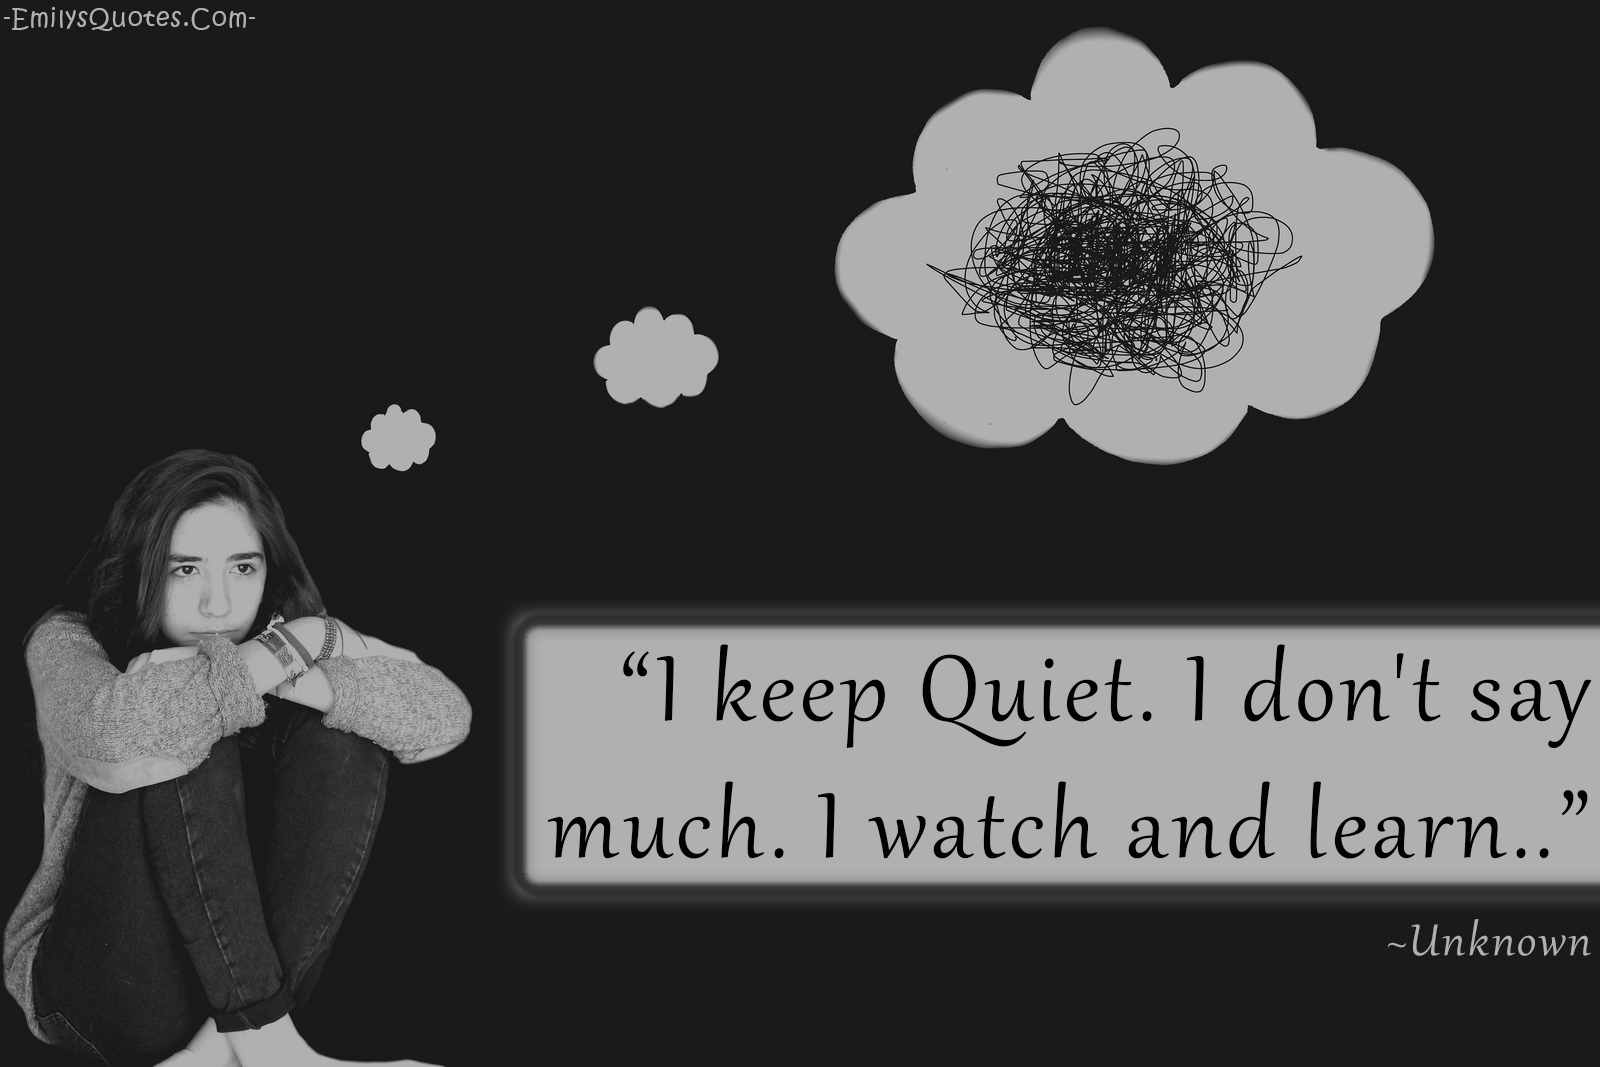 I keep Quiet. I don’t say much. I watch and learn…